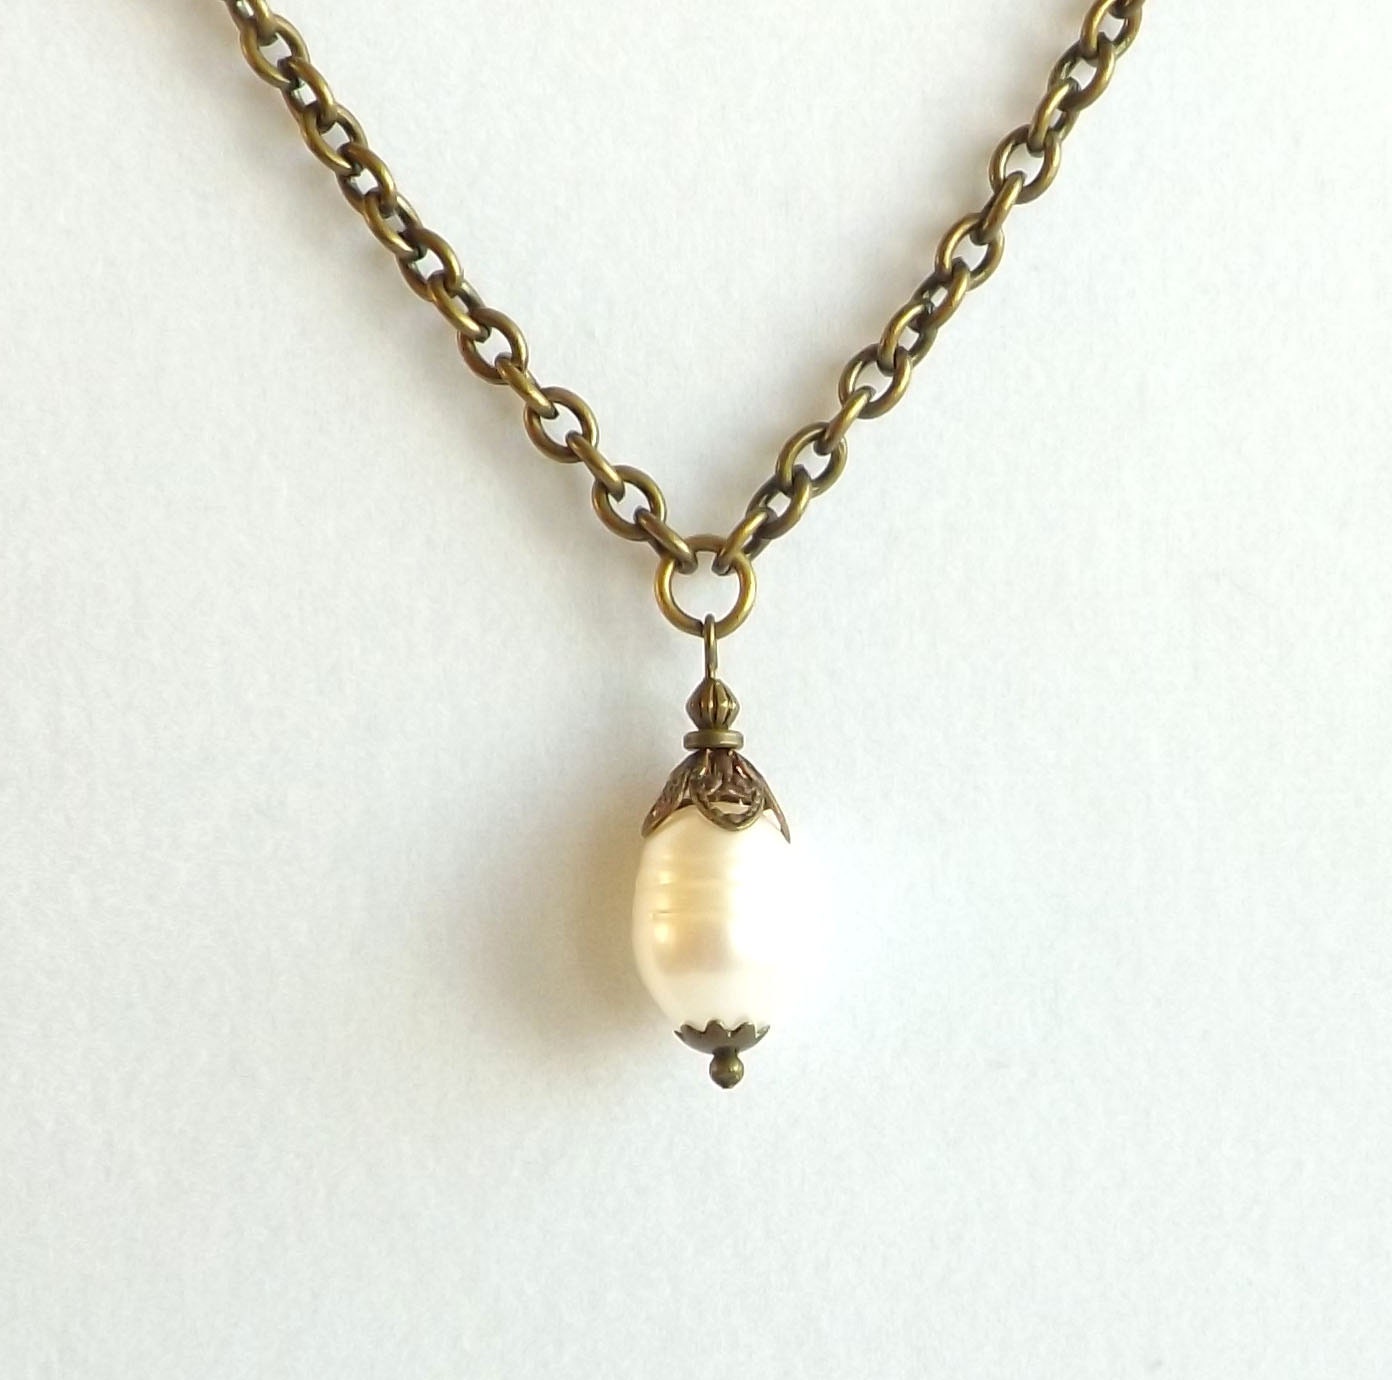 Freshwater Pearl Drop Necklace with Antique Brass Chain and Accents/Downton Abbey/Gift - connectionsbymaya